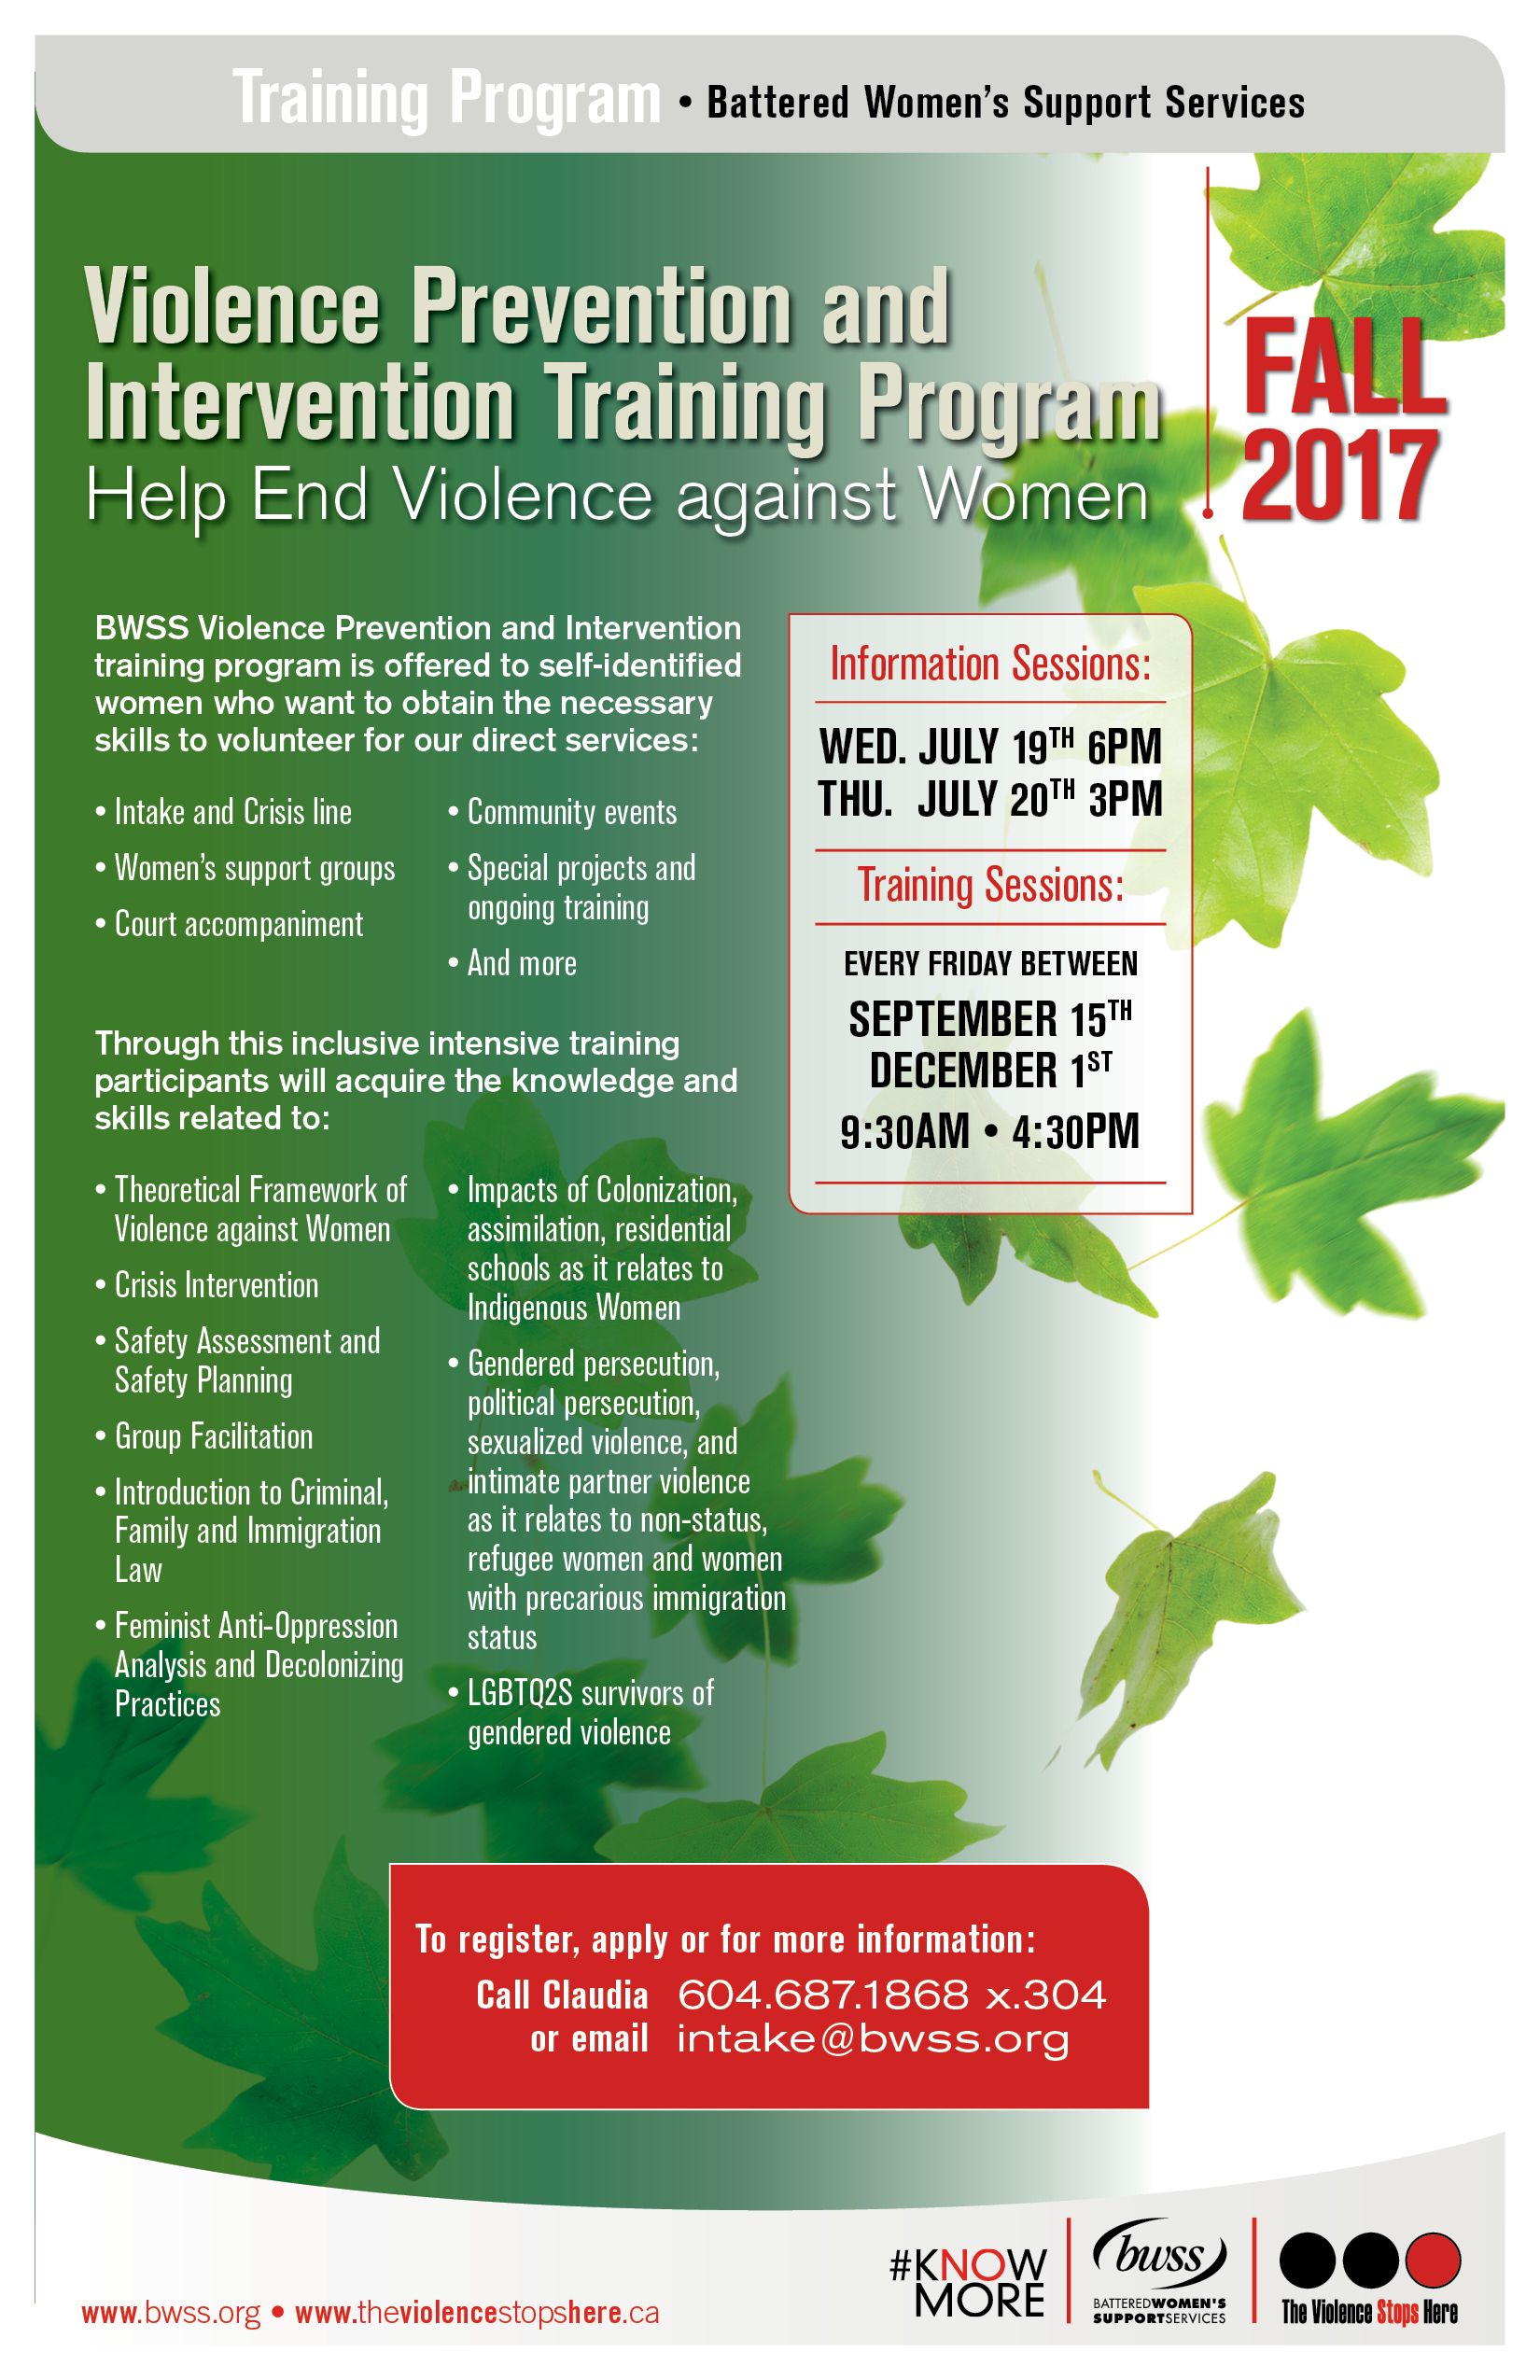 Violence Prevention and Intervention Training Fall 2017